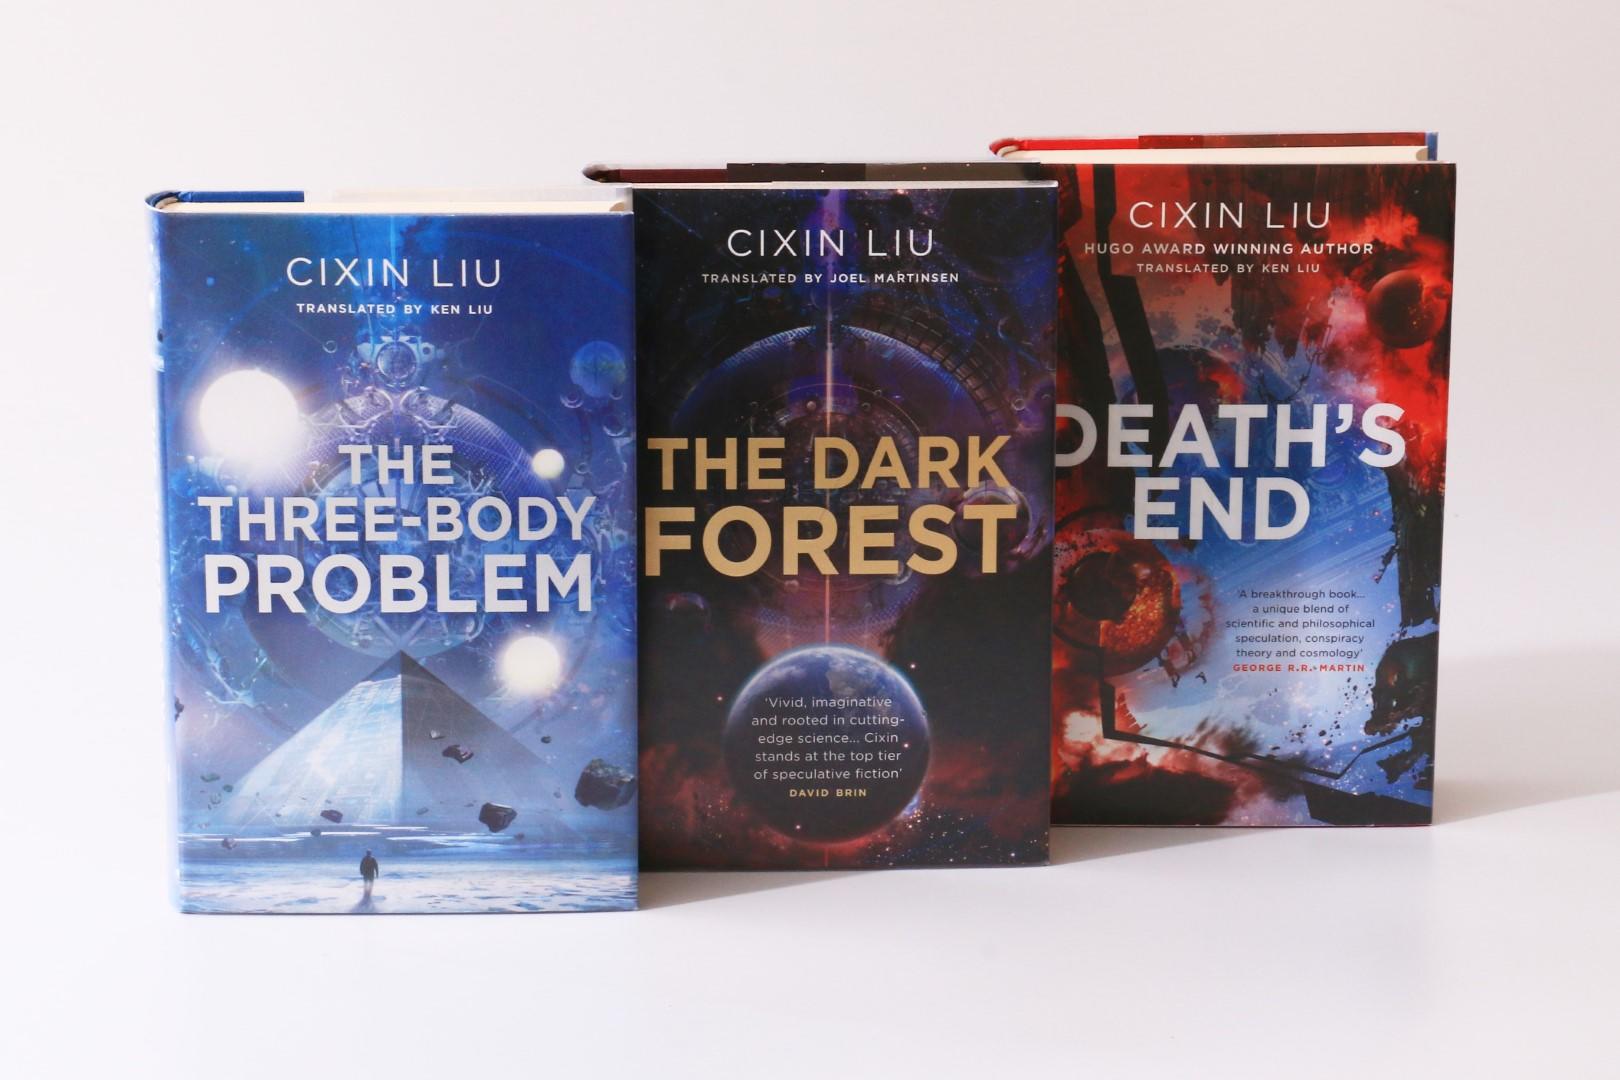 Cixin Liu [trans. Ken Liu] - The Remembrance of Earth's Past Trilogy [comprising] The Three-Body Problem, The Dark Forest and Death's End - Head of Zeus, 2015, First Edition.